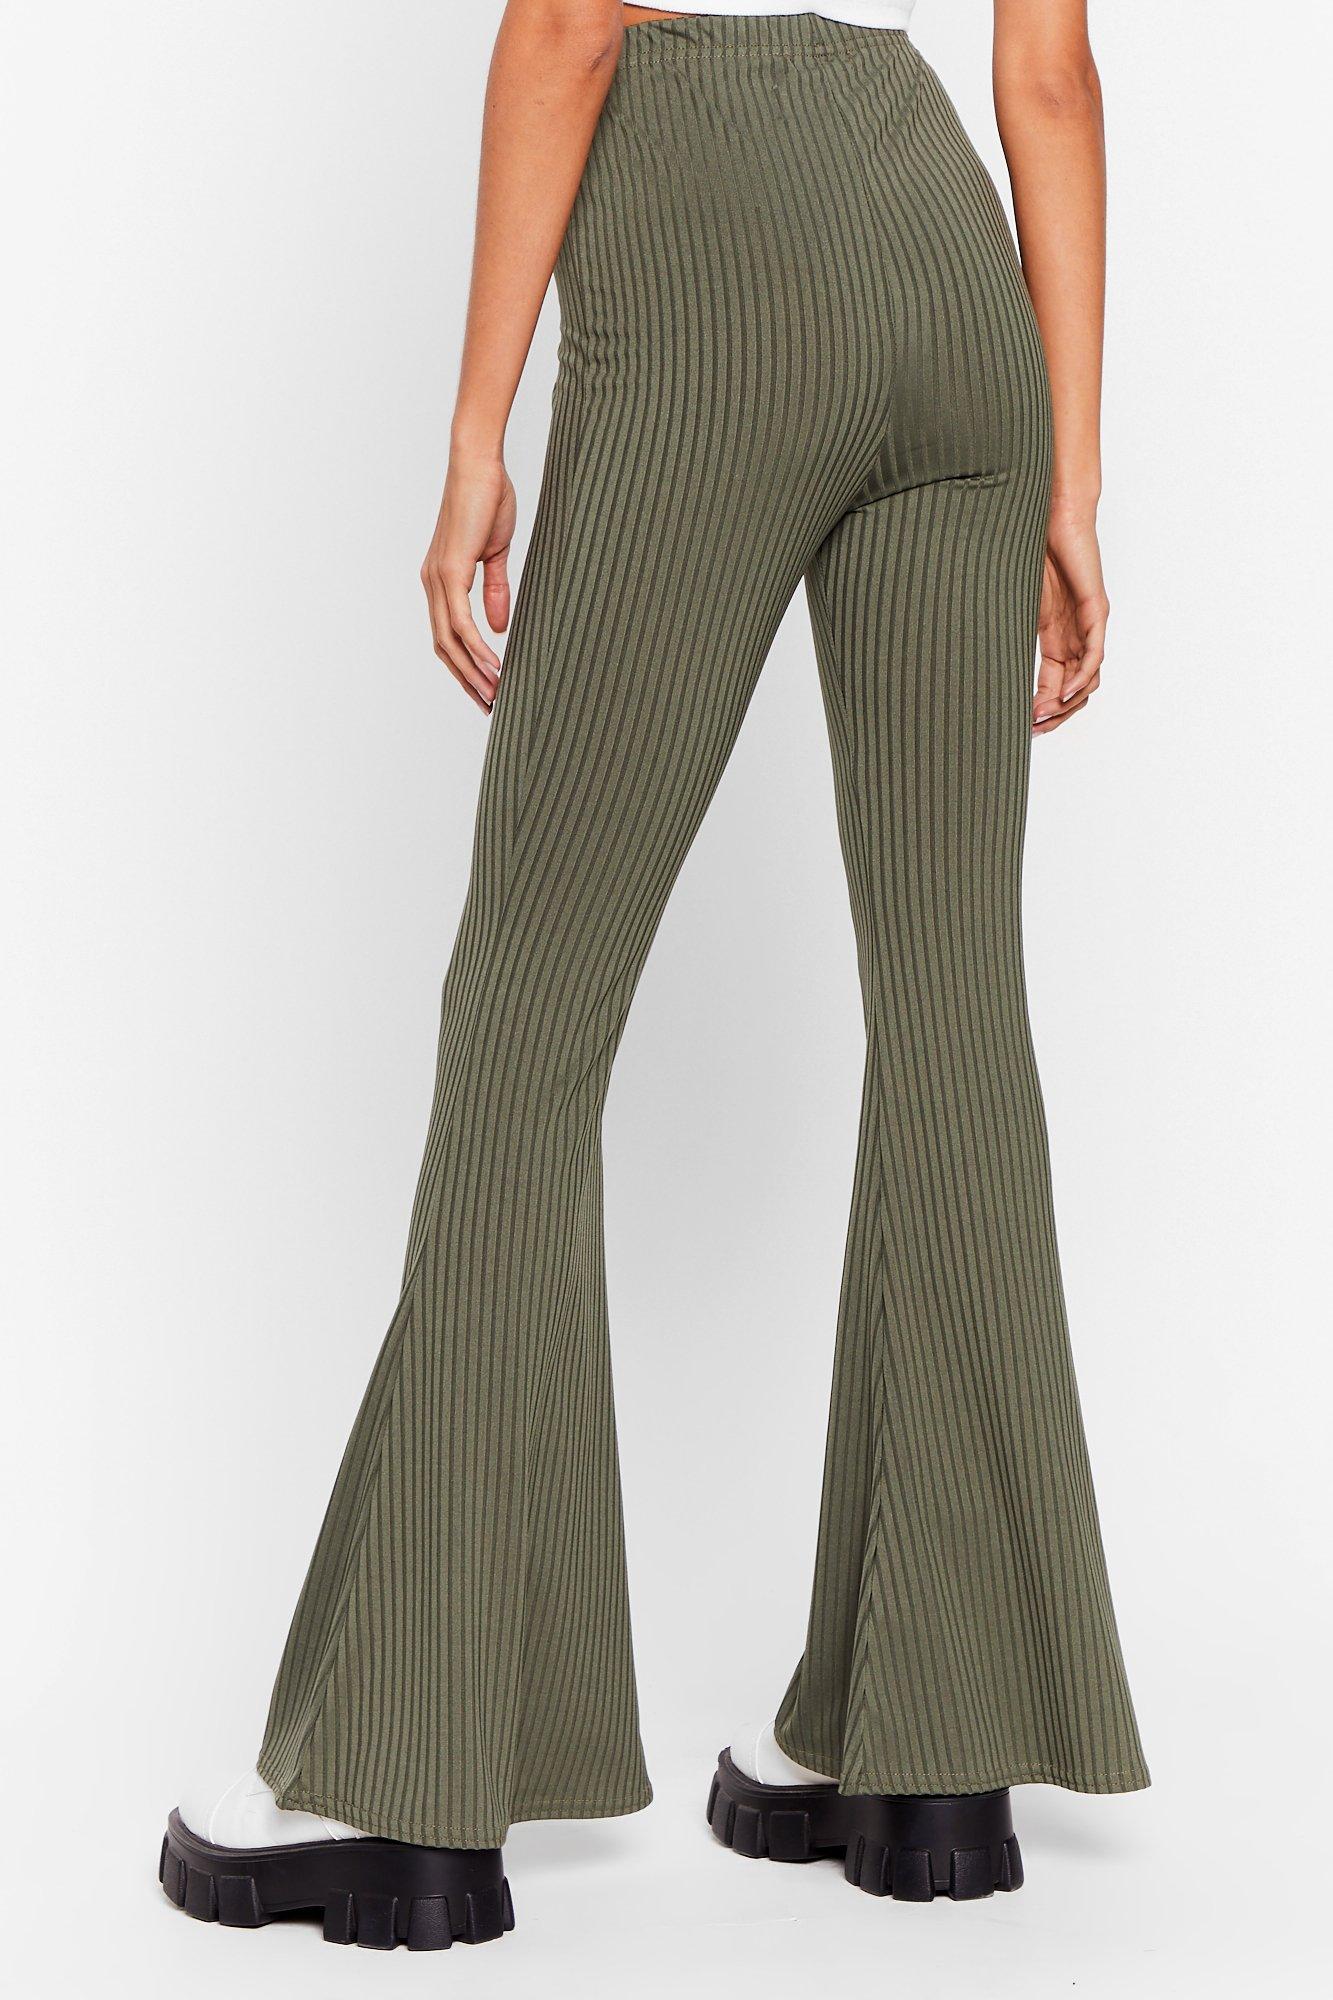 flare high rise pants